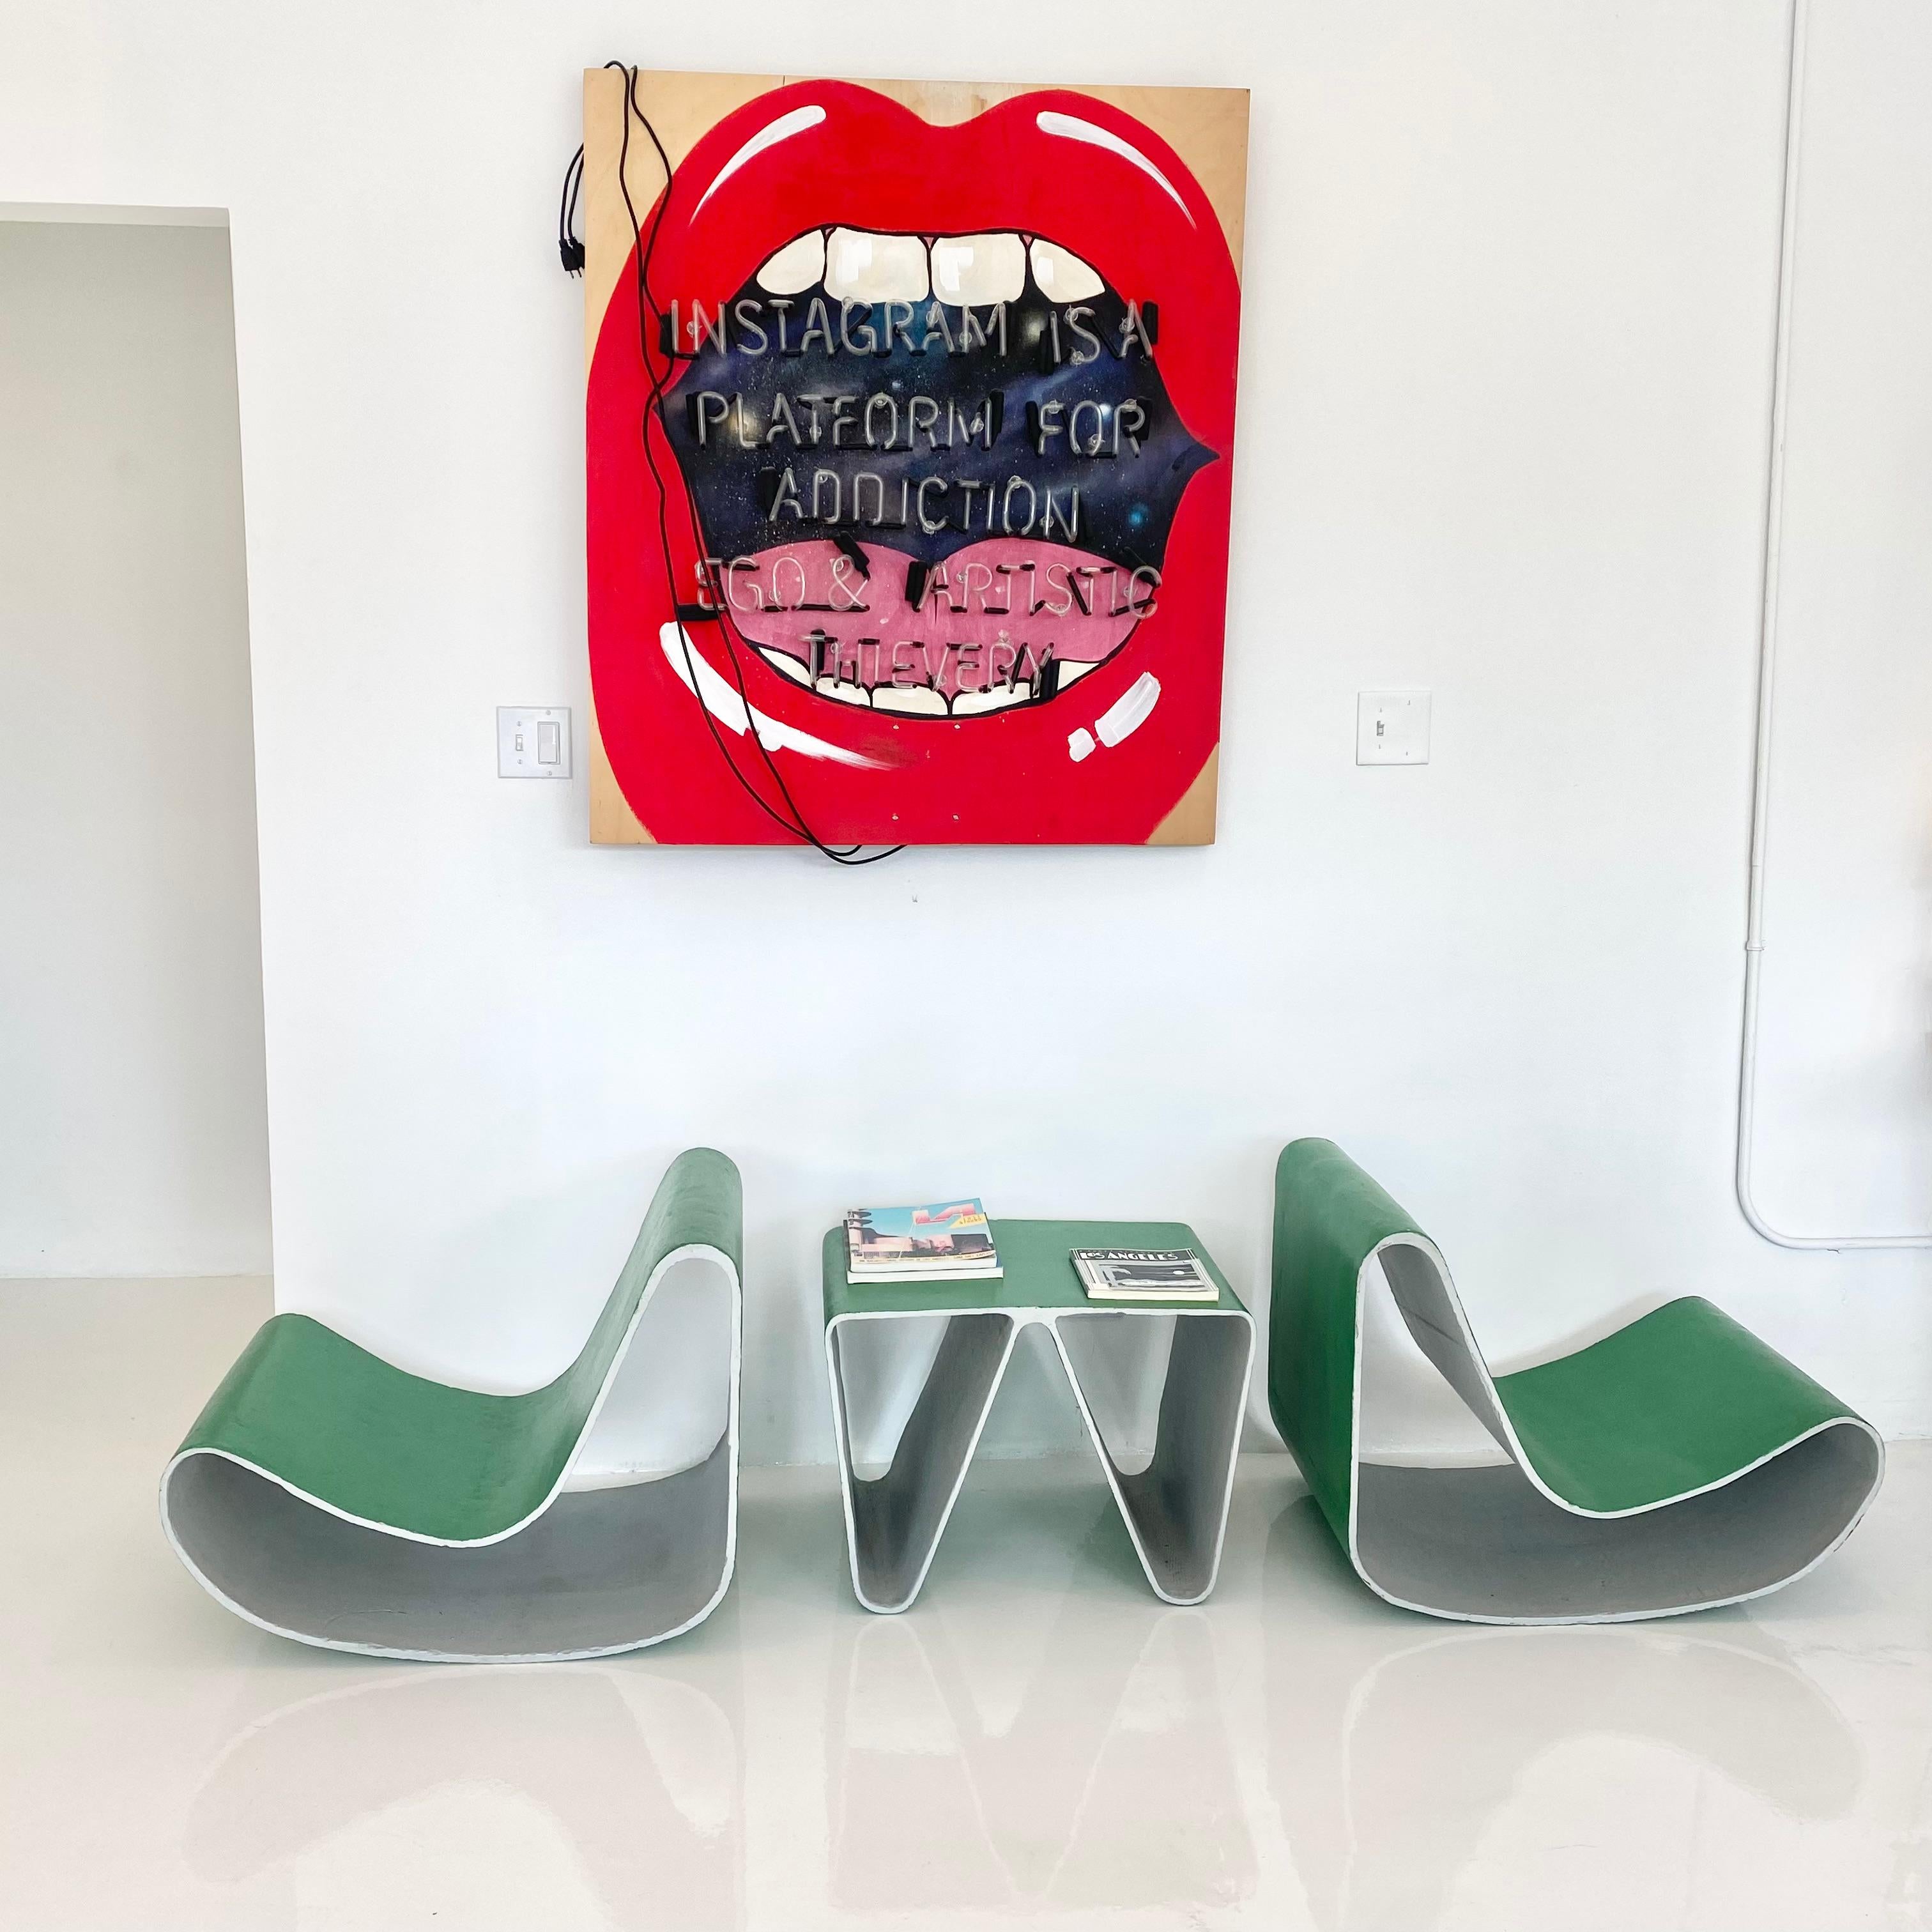 Important set of concrete chairs and matching table. Likely a prototype for the widely known Loop Chairs. Extremely similar shape but more rounded and slightly roomier and more comfortable. Interesting triangular table as well. Painted green and